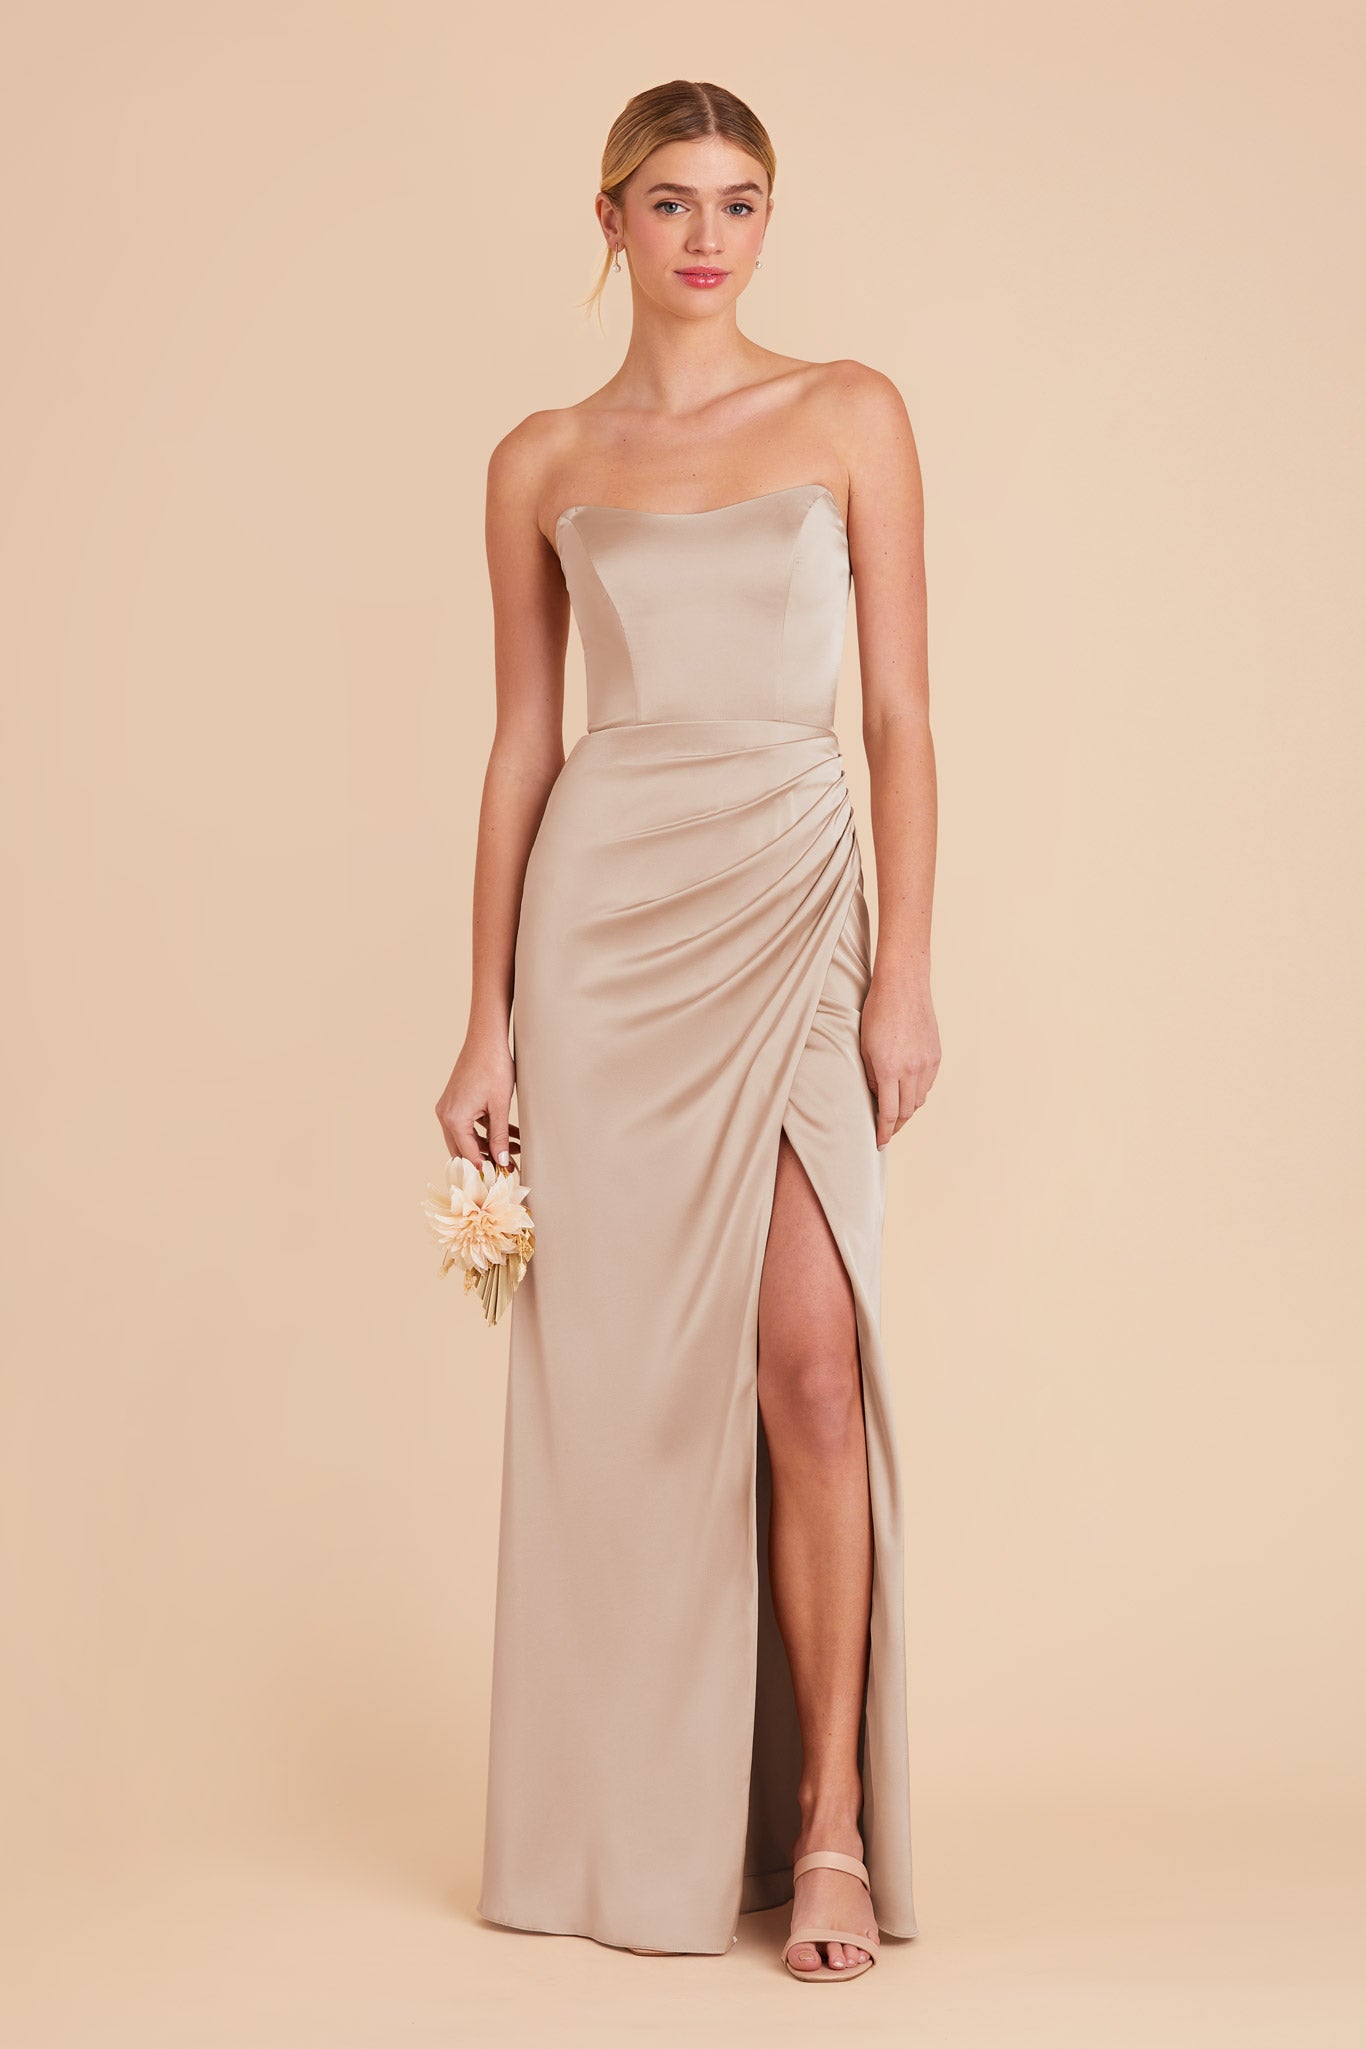 Taupe Anne Matte Satin Dress by Birdy Grey